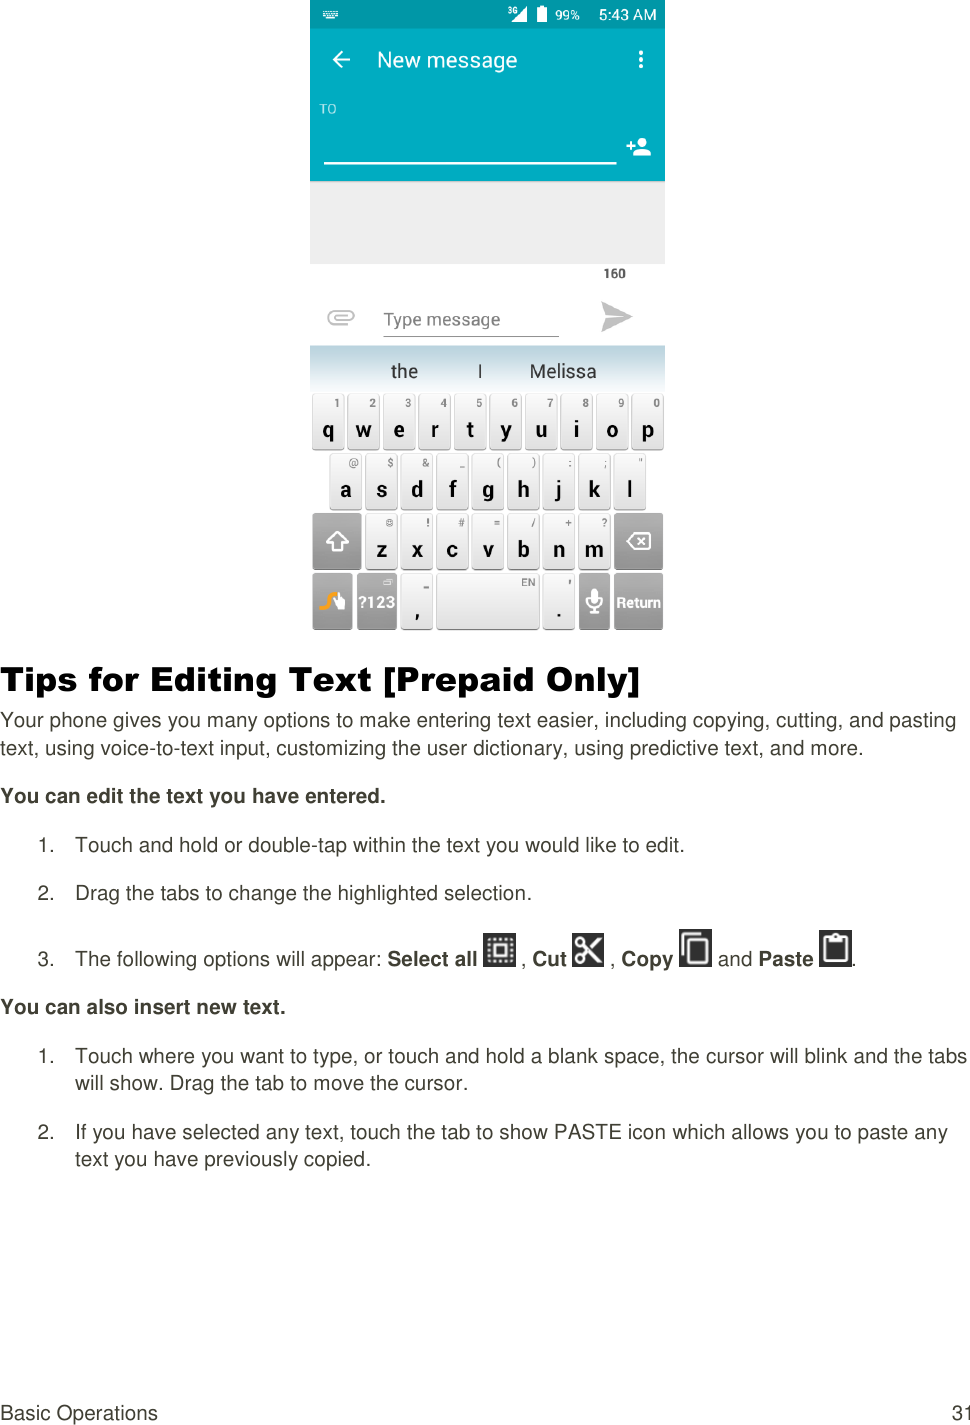 Basic Operations  31  Tips for Editing Text [Prepaid Only] Your phone gives you many options to make entering text easier, including copying, cutting, and pasting text, using voice-to-text input, customizing the user dictionary, using predictive text, and more. You can edit the text you have entered. 1.  Touch and hold or double-tap within the text you would like to edit. 2.  Drag the tabs to change the highlighted selection. 3.  The following options will appear: Select all   , Cut   , Copy   and Paste  . You can also insert new text. 1.  Touch where you want to type, or touch and hold a blank space, the cursor will blink and the tabs will show. Drag the tab to move the cursor. 2.  If you have selected any text, touch the tab to show PASTE icon which allows you to paste any text you have previously copied.  